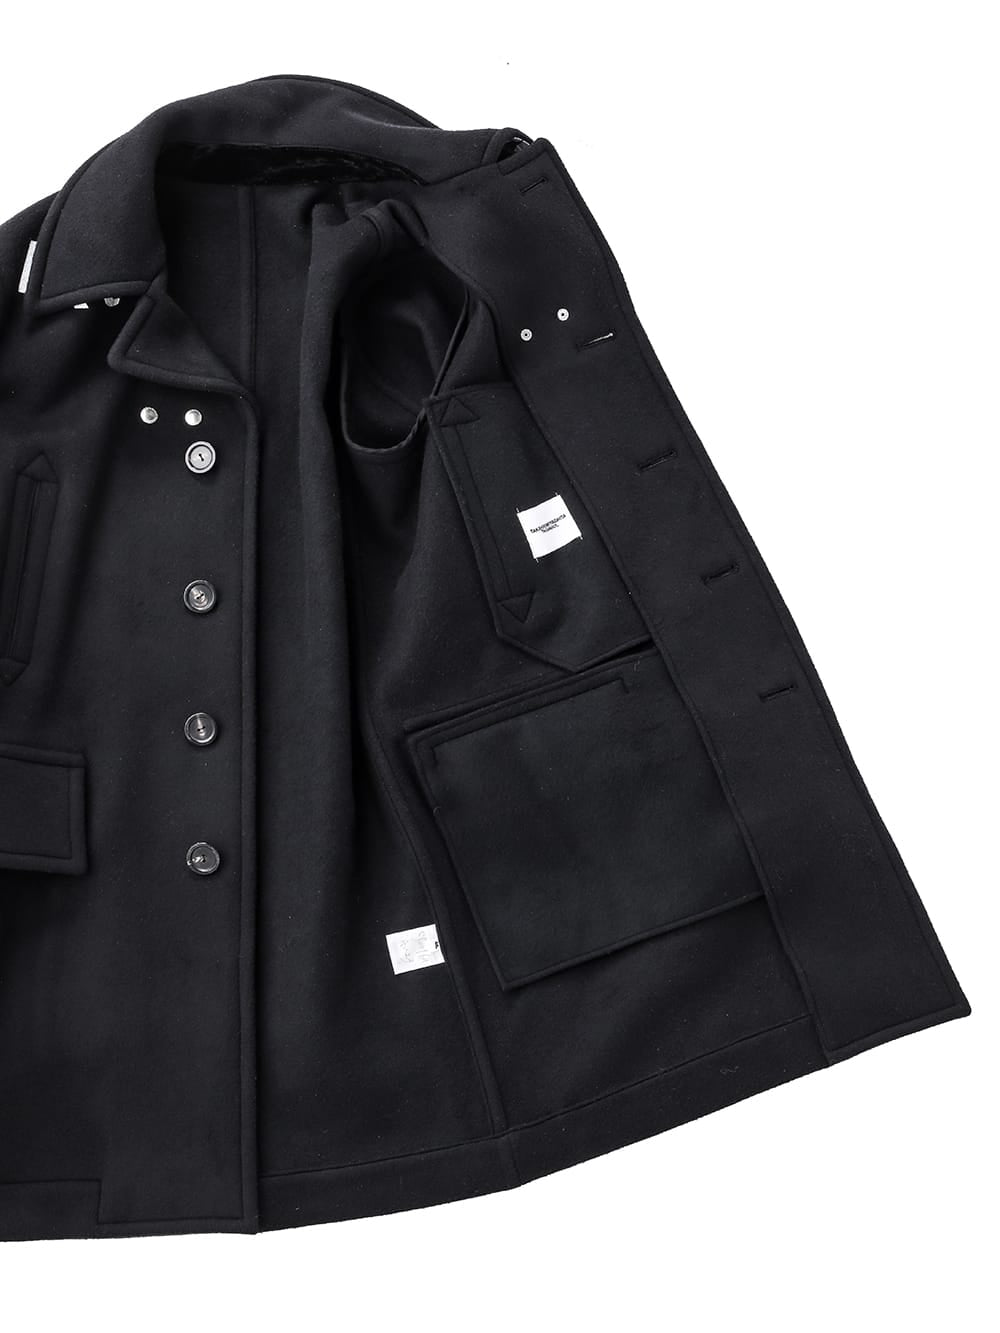 right - left pencil silhouette single breasted peacoat.